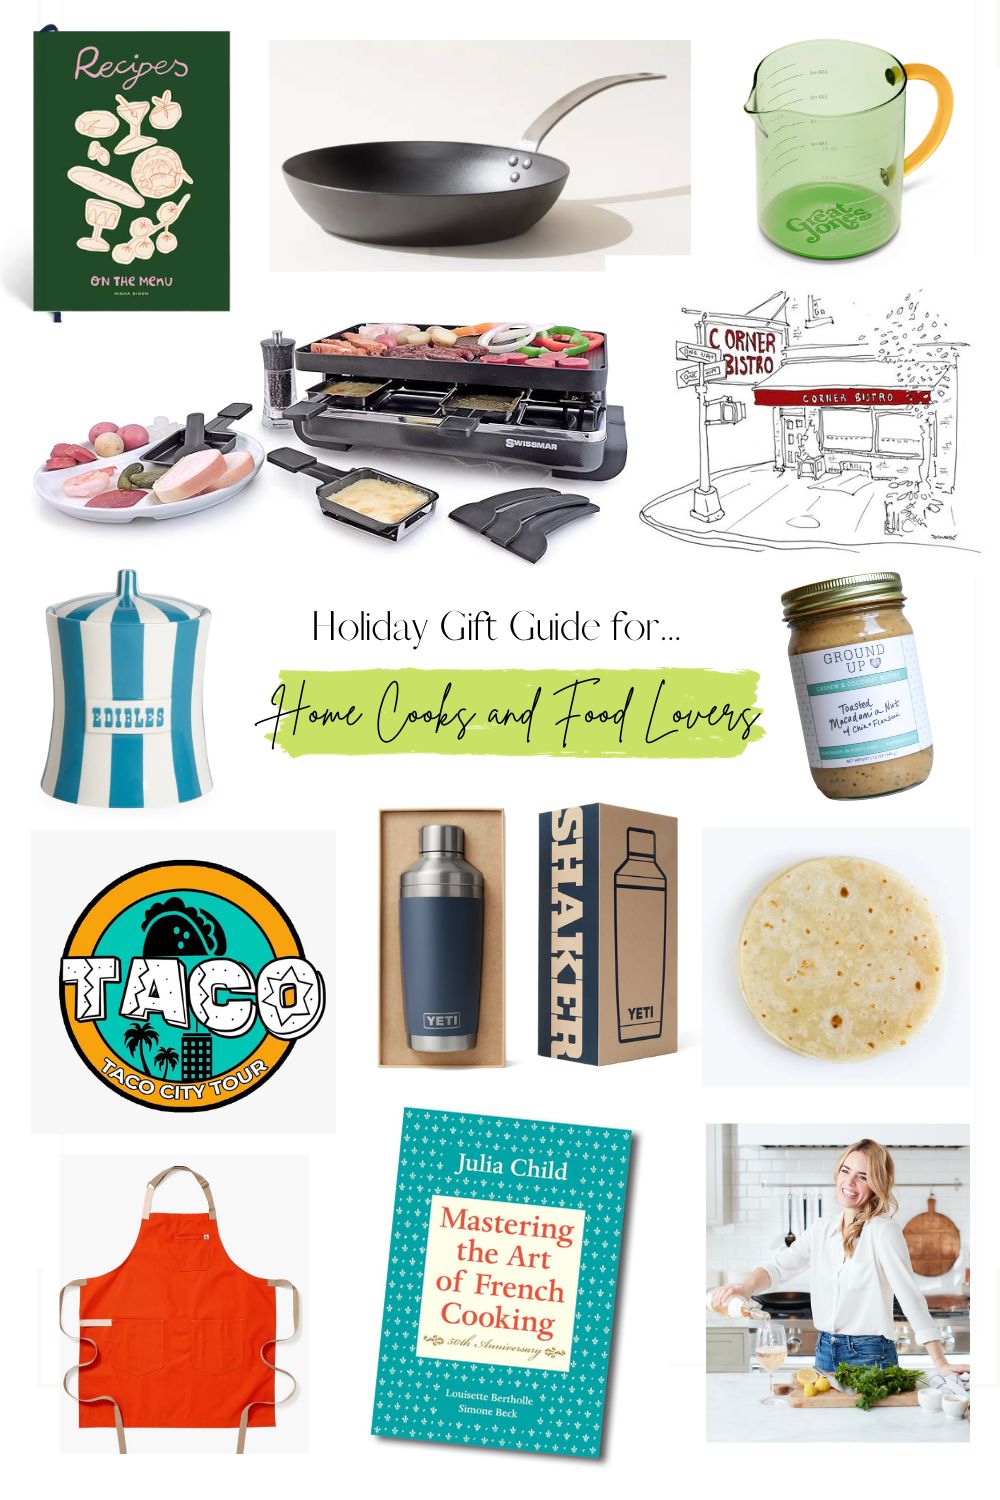 Collaged images of gift ideas for cooks and foodies.
